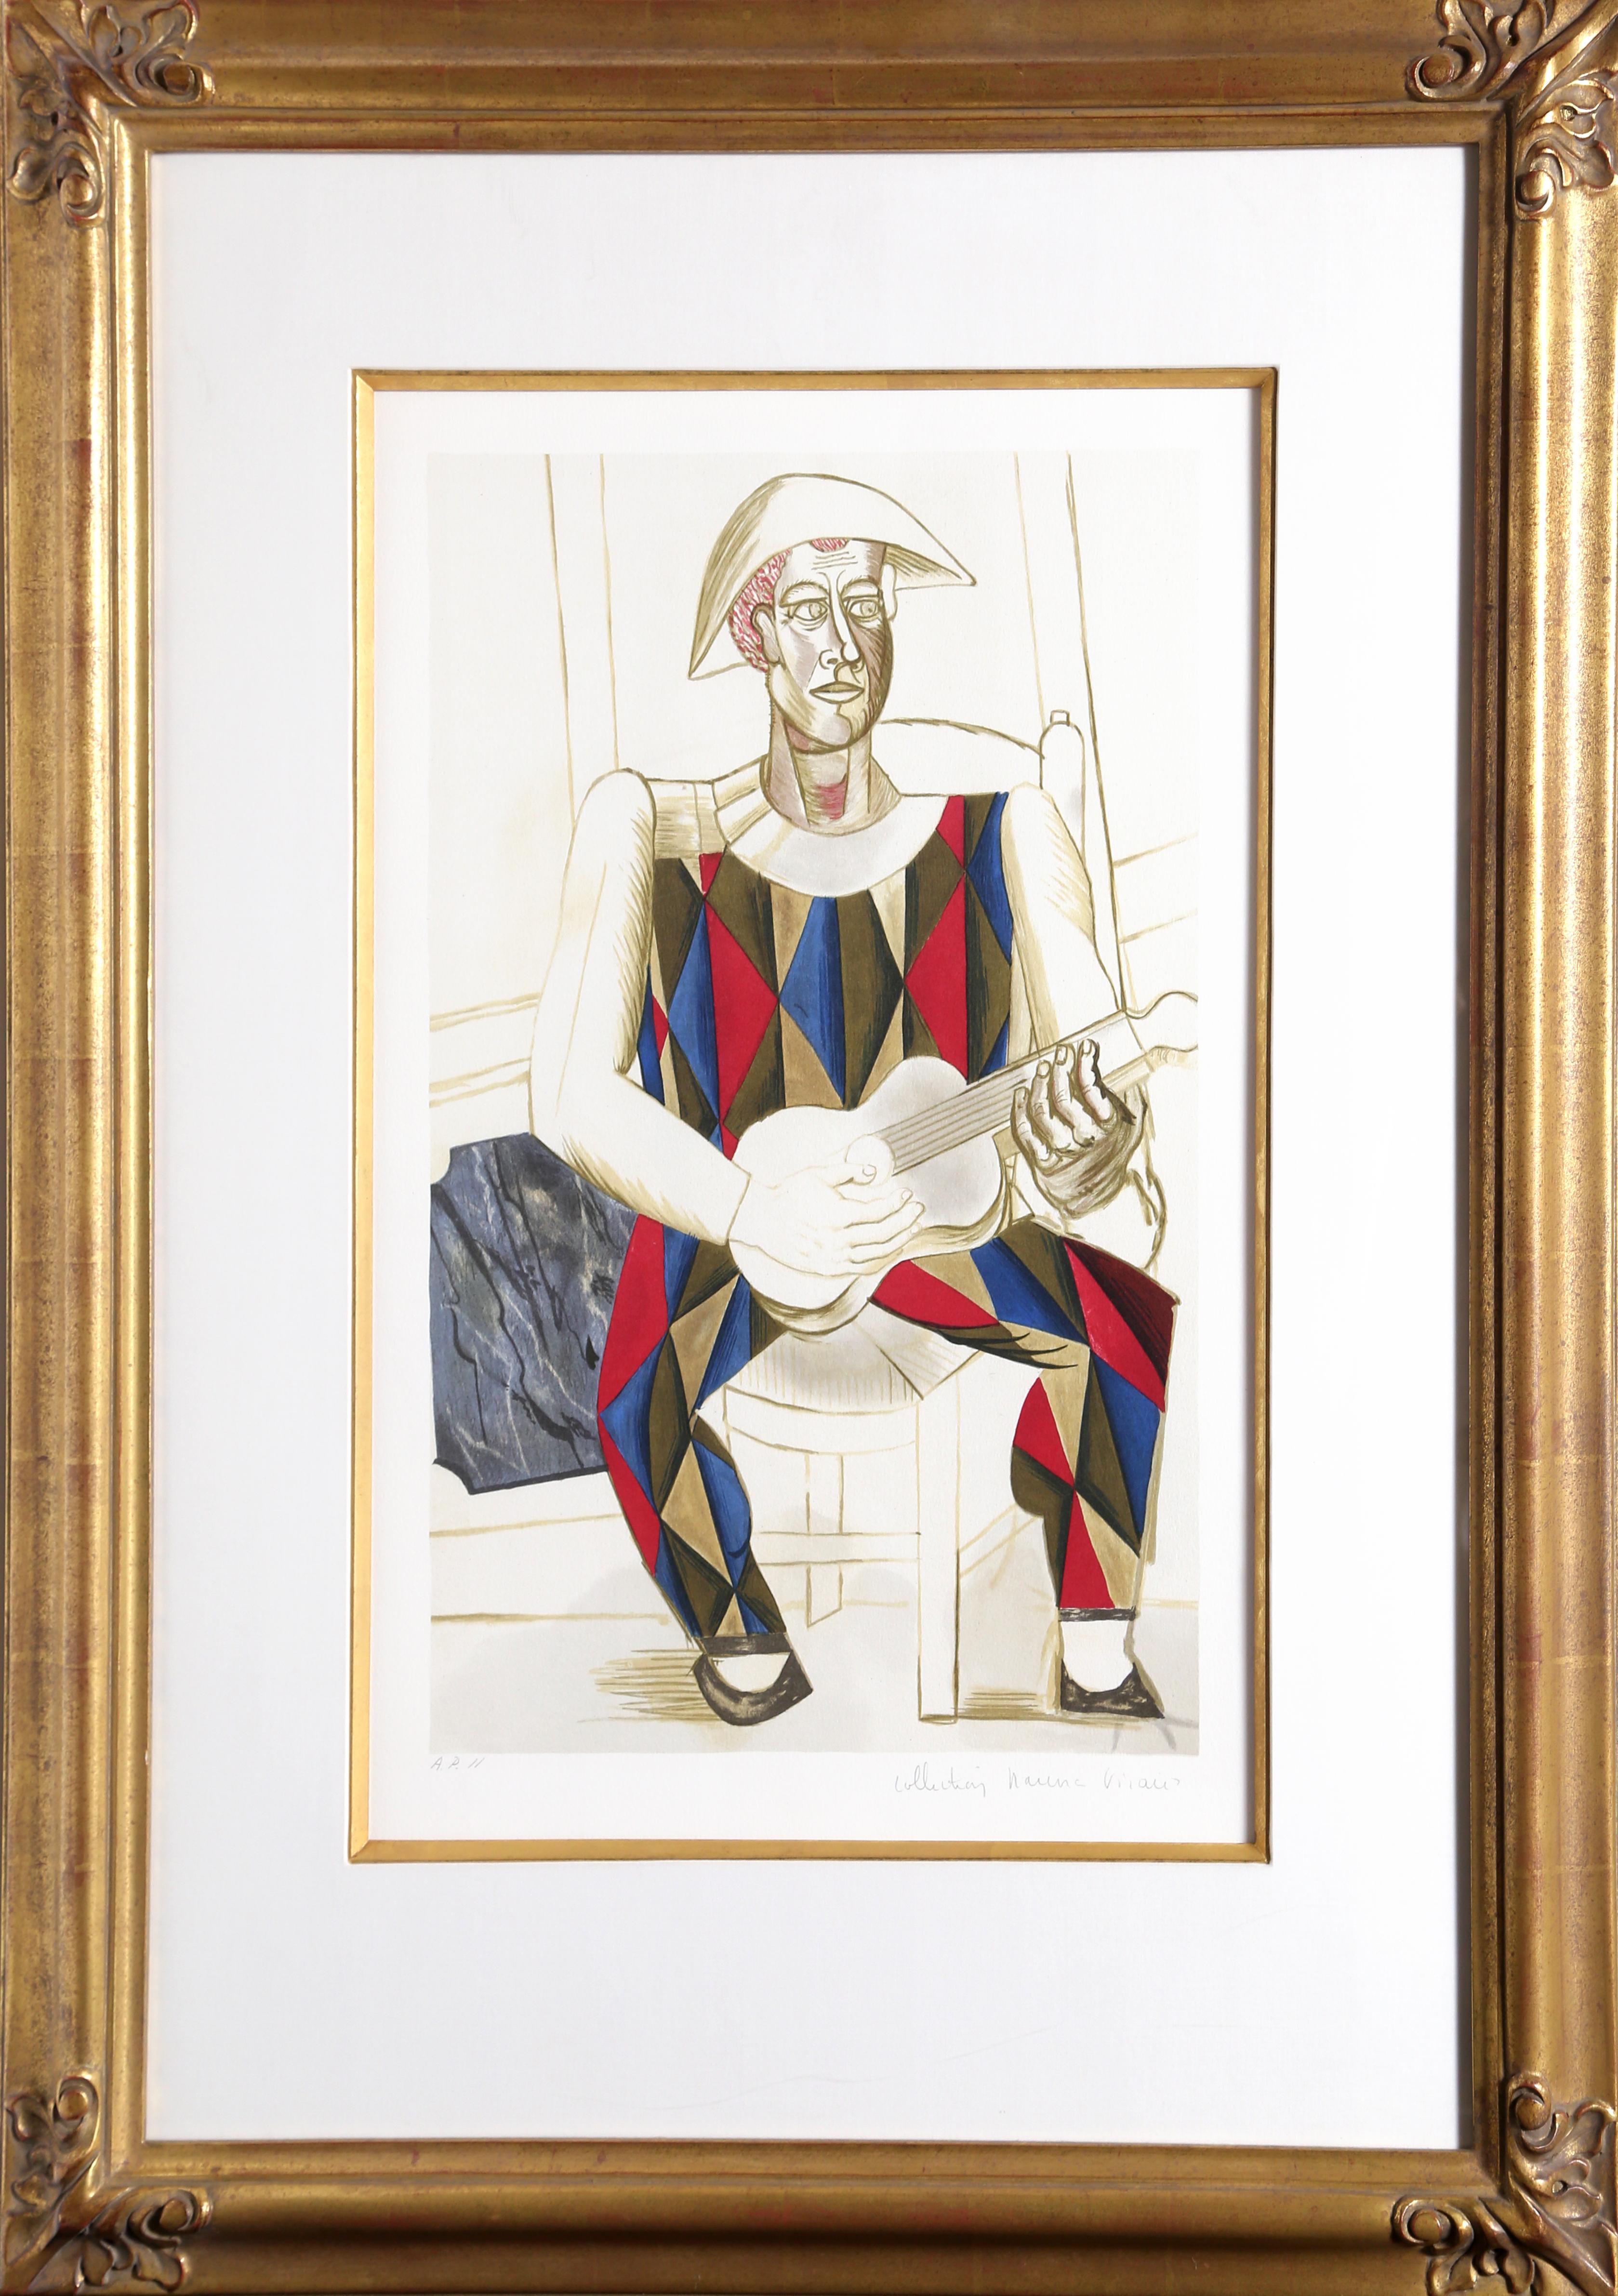 A lithograph from the Marina Picasso Estate Collection after the Pablo Picasso painting "Arlequin a la Guitare".  The original painting was completed in 1916. In the 1970's after Picasso's death, Marina Picasso, his granddaughter, authorized the